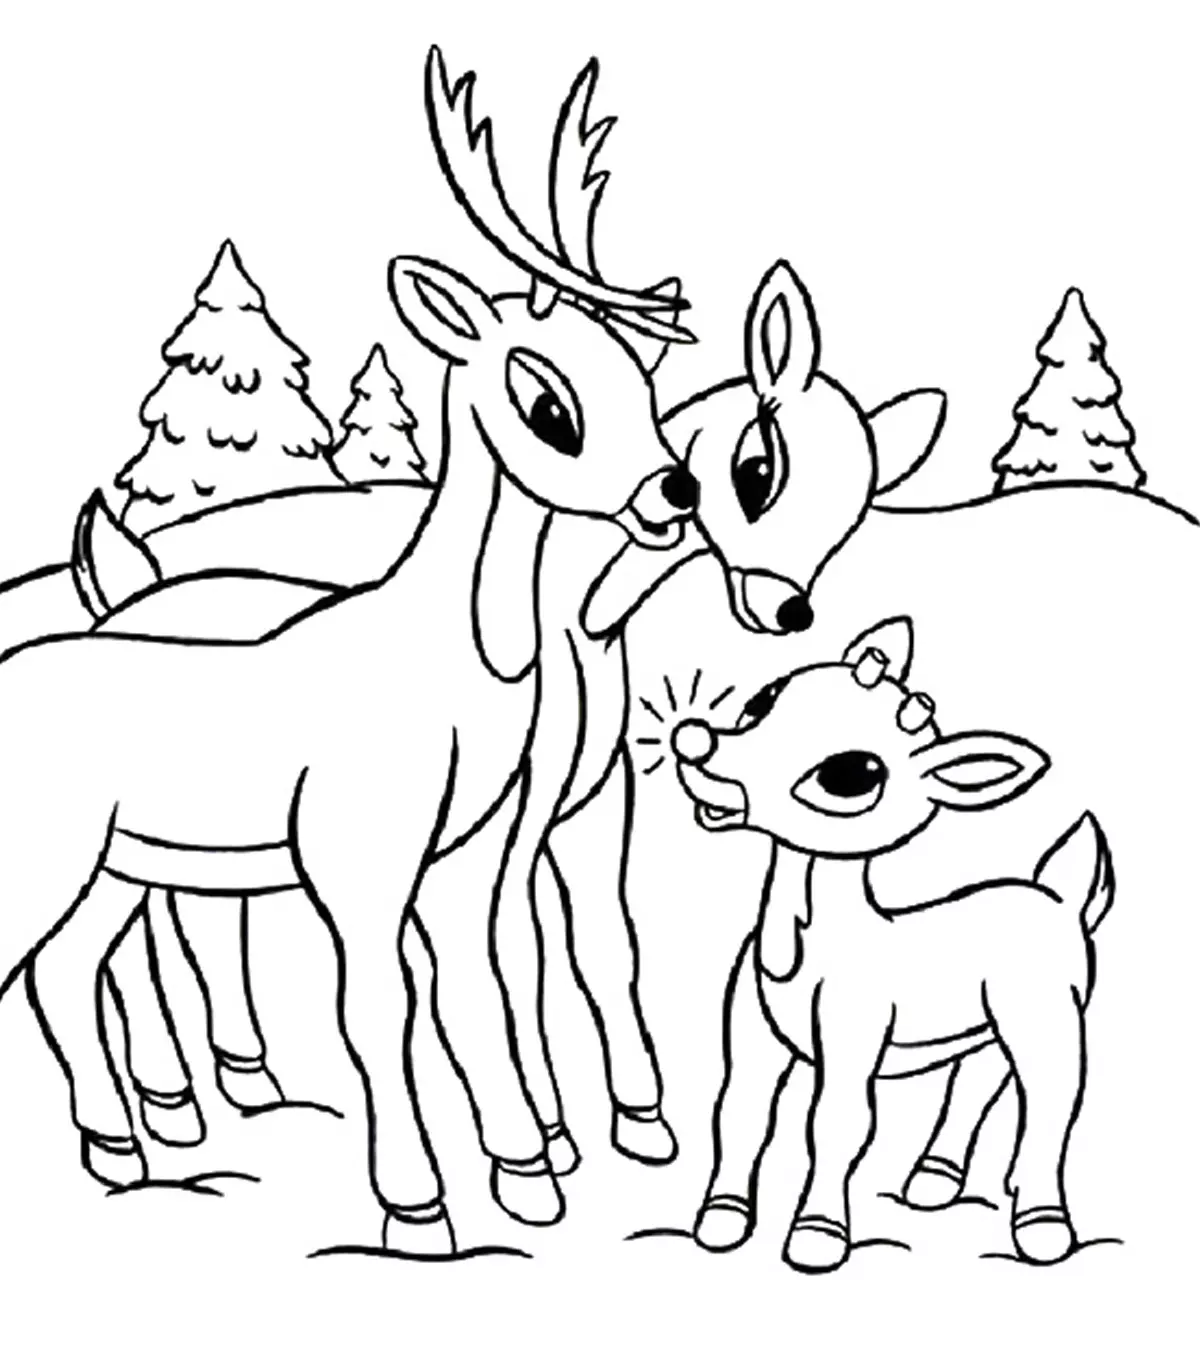 20 Best Rudolph 'The Red Nosed Reindeer' Coloring Pages for Your Little Ones